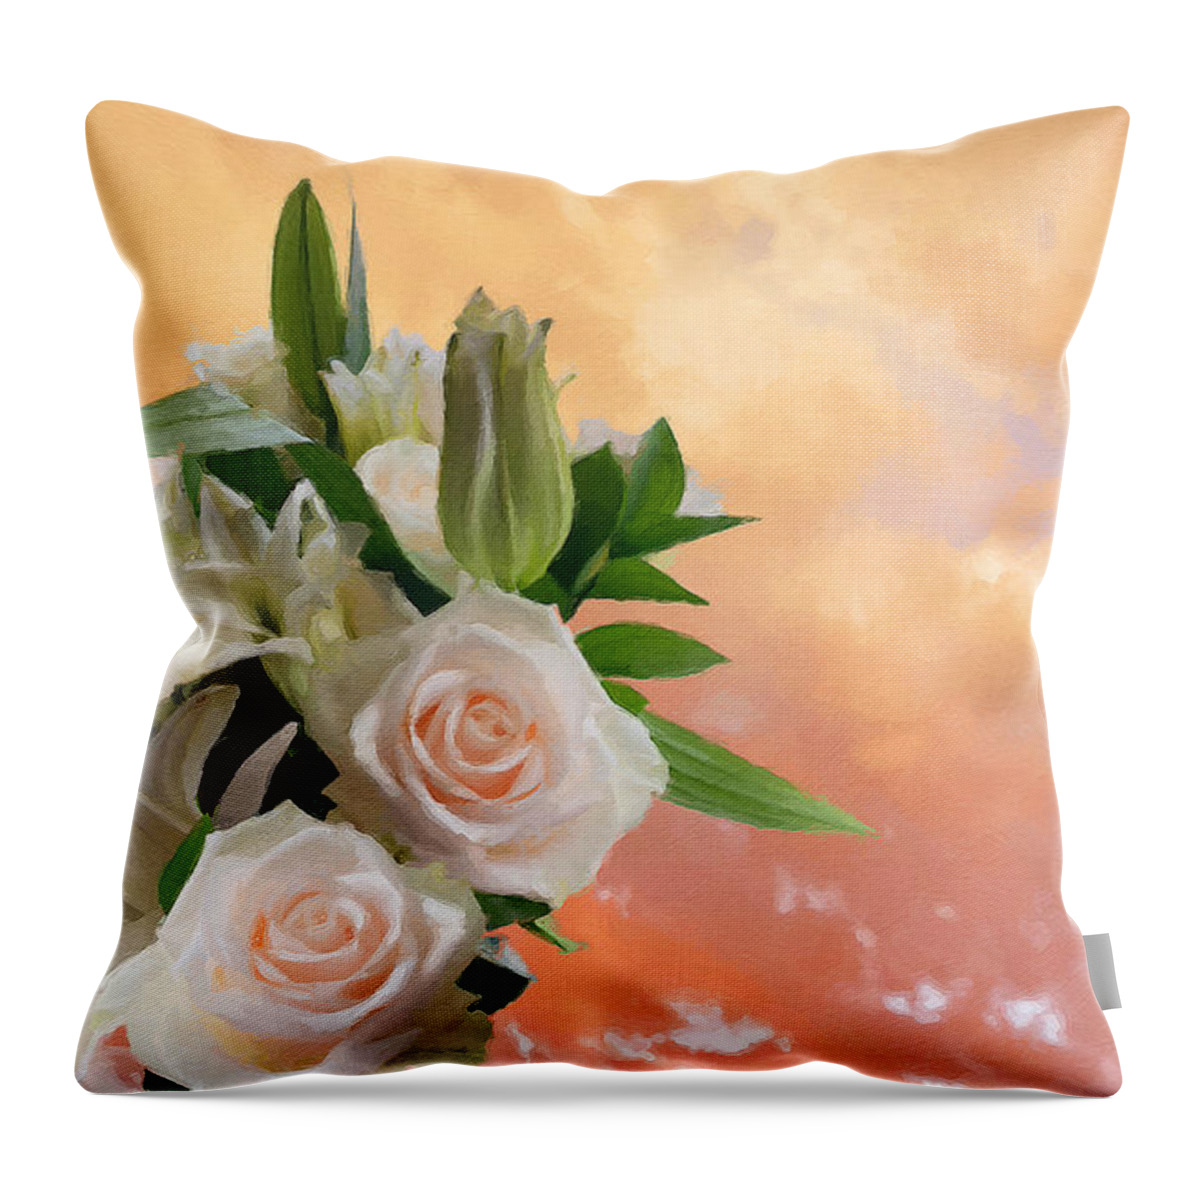 Roses Throw Pillow featuring the photograph White Roses Orange Sunset by Brian Watt